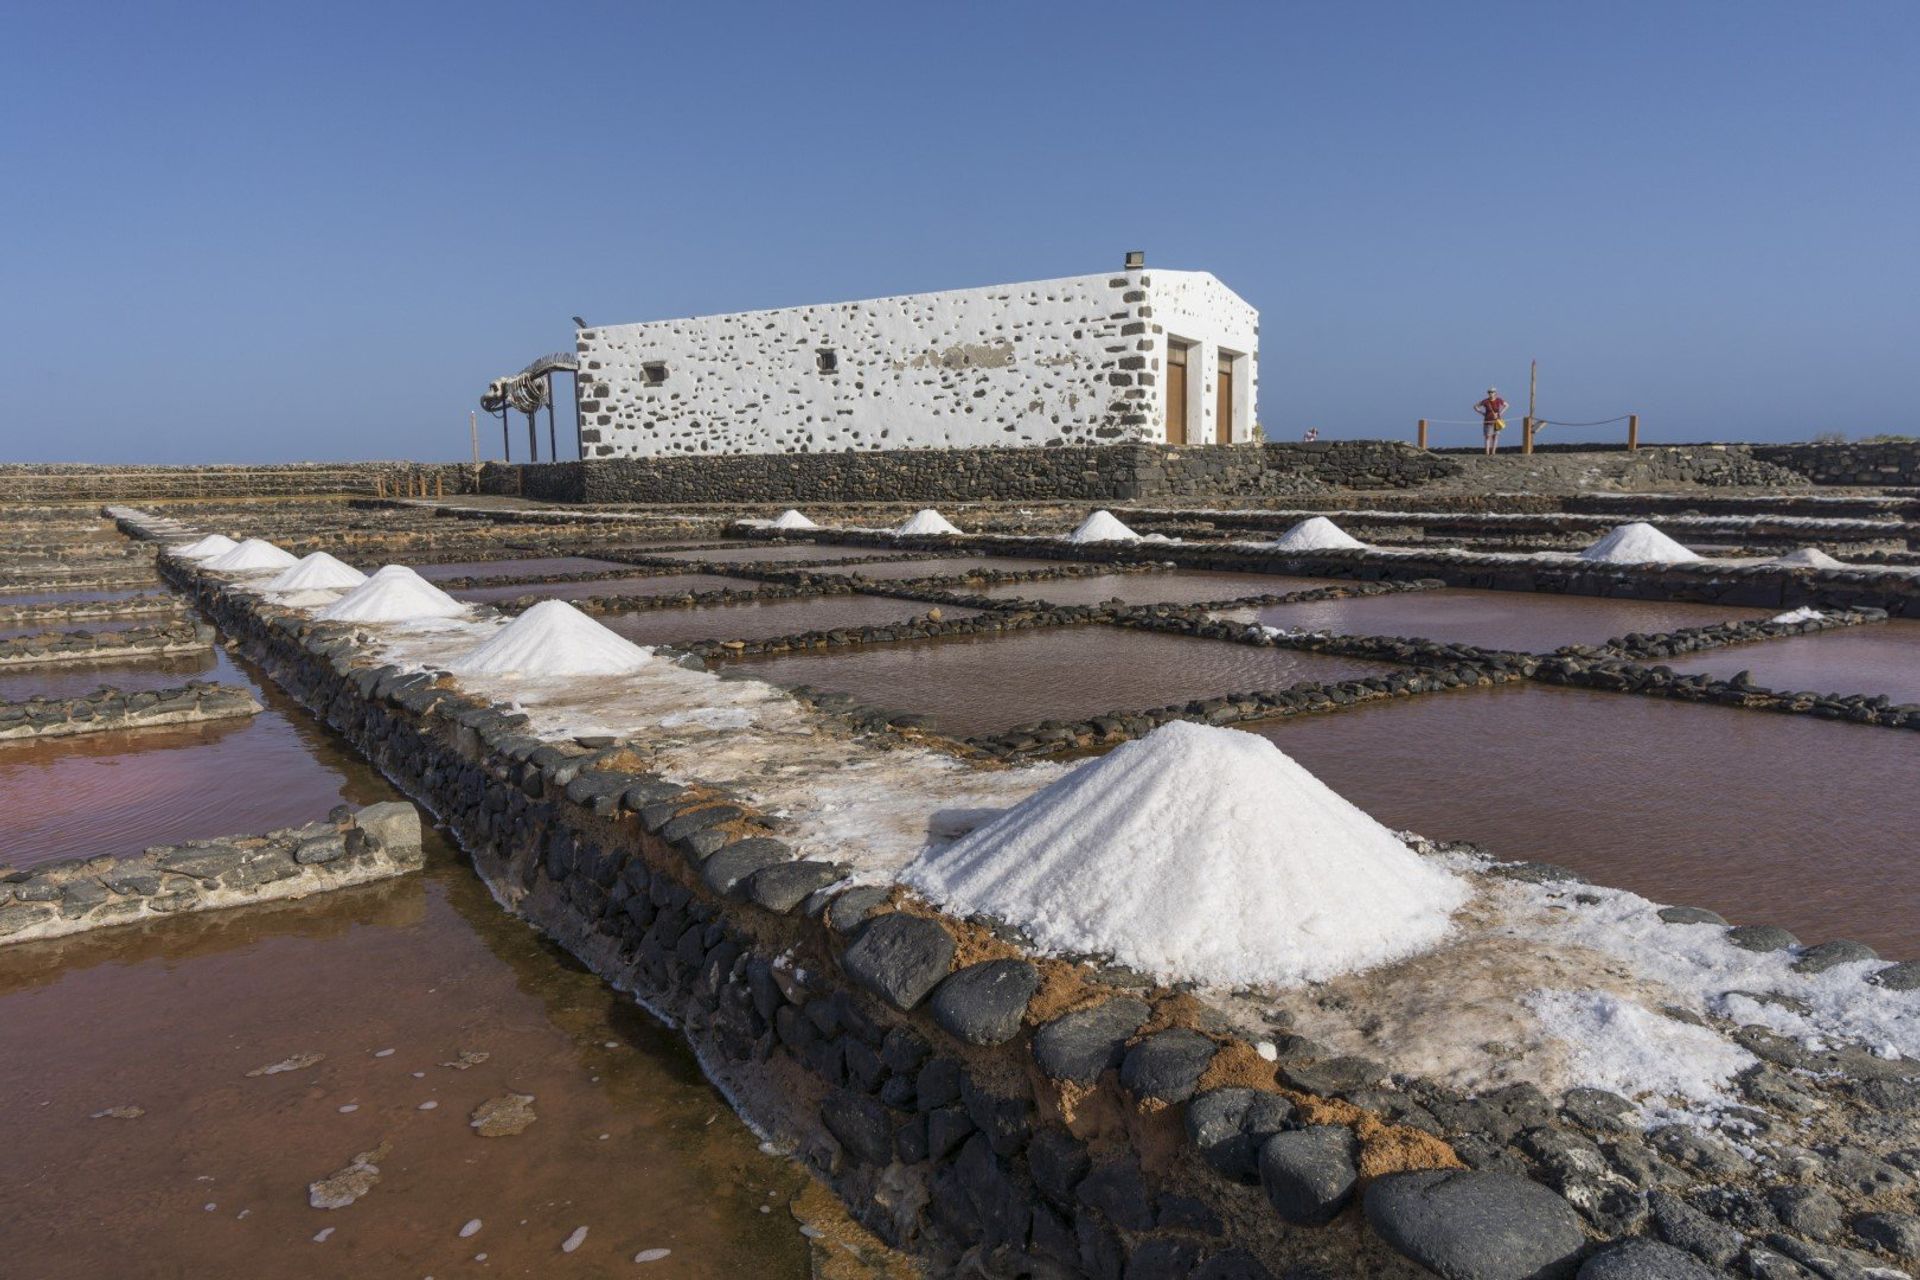 The Salt Museum at the entrance of the small fishing village of Salinas del Carmen